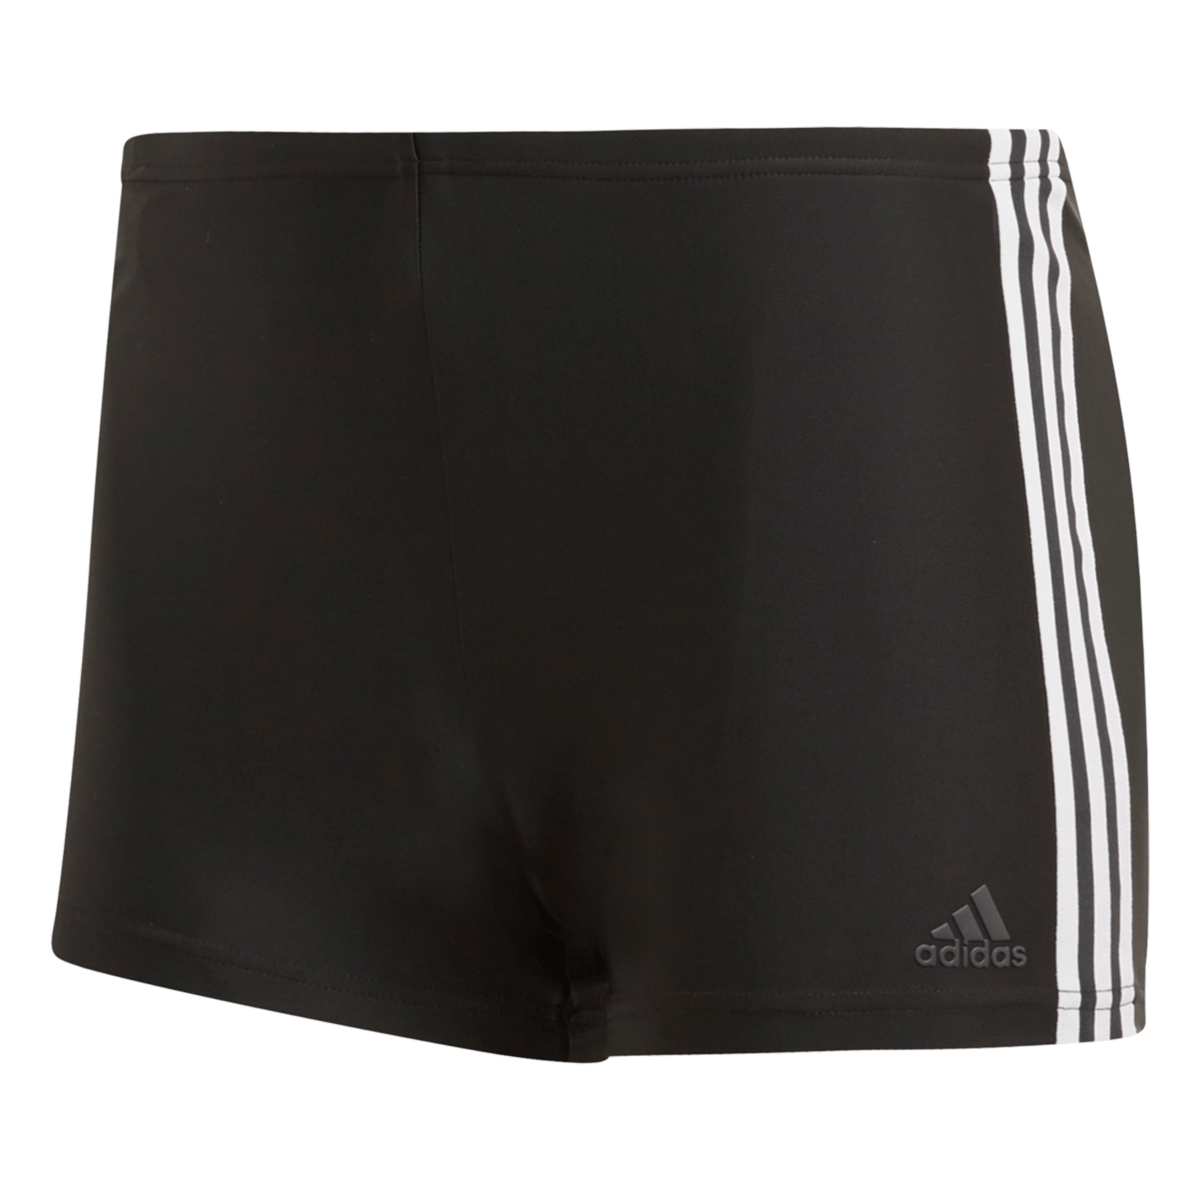 FIT BX 3S ADIDAS